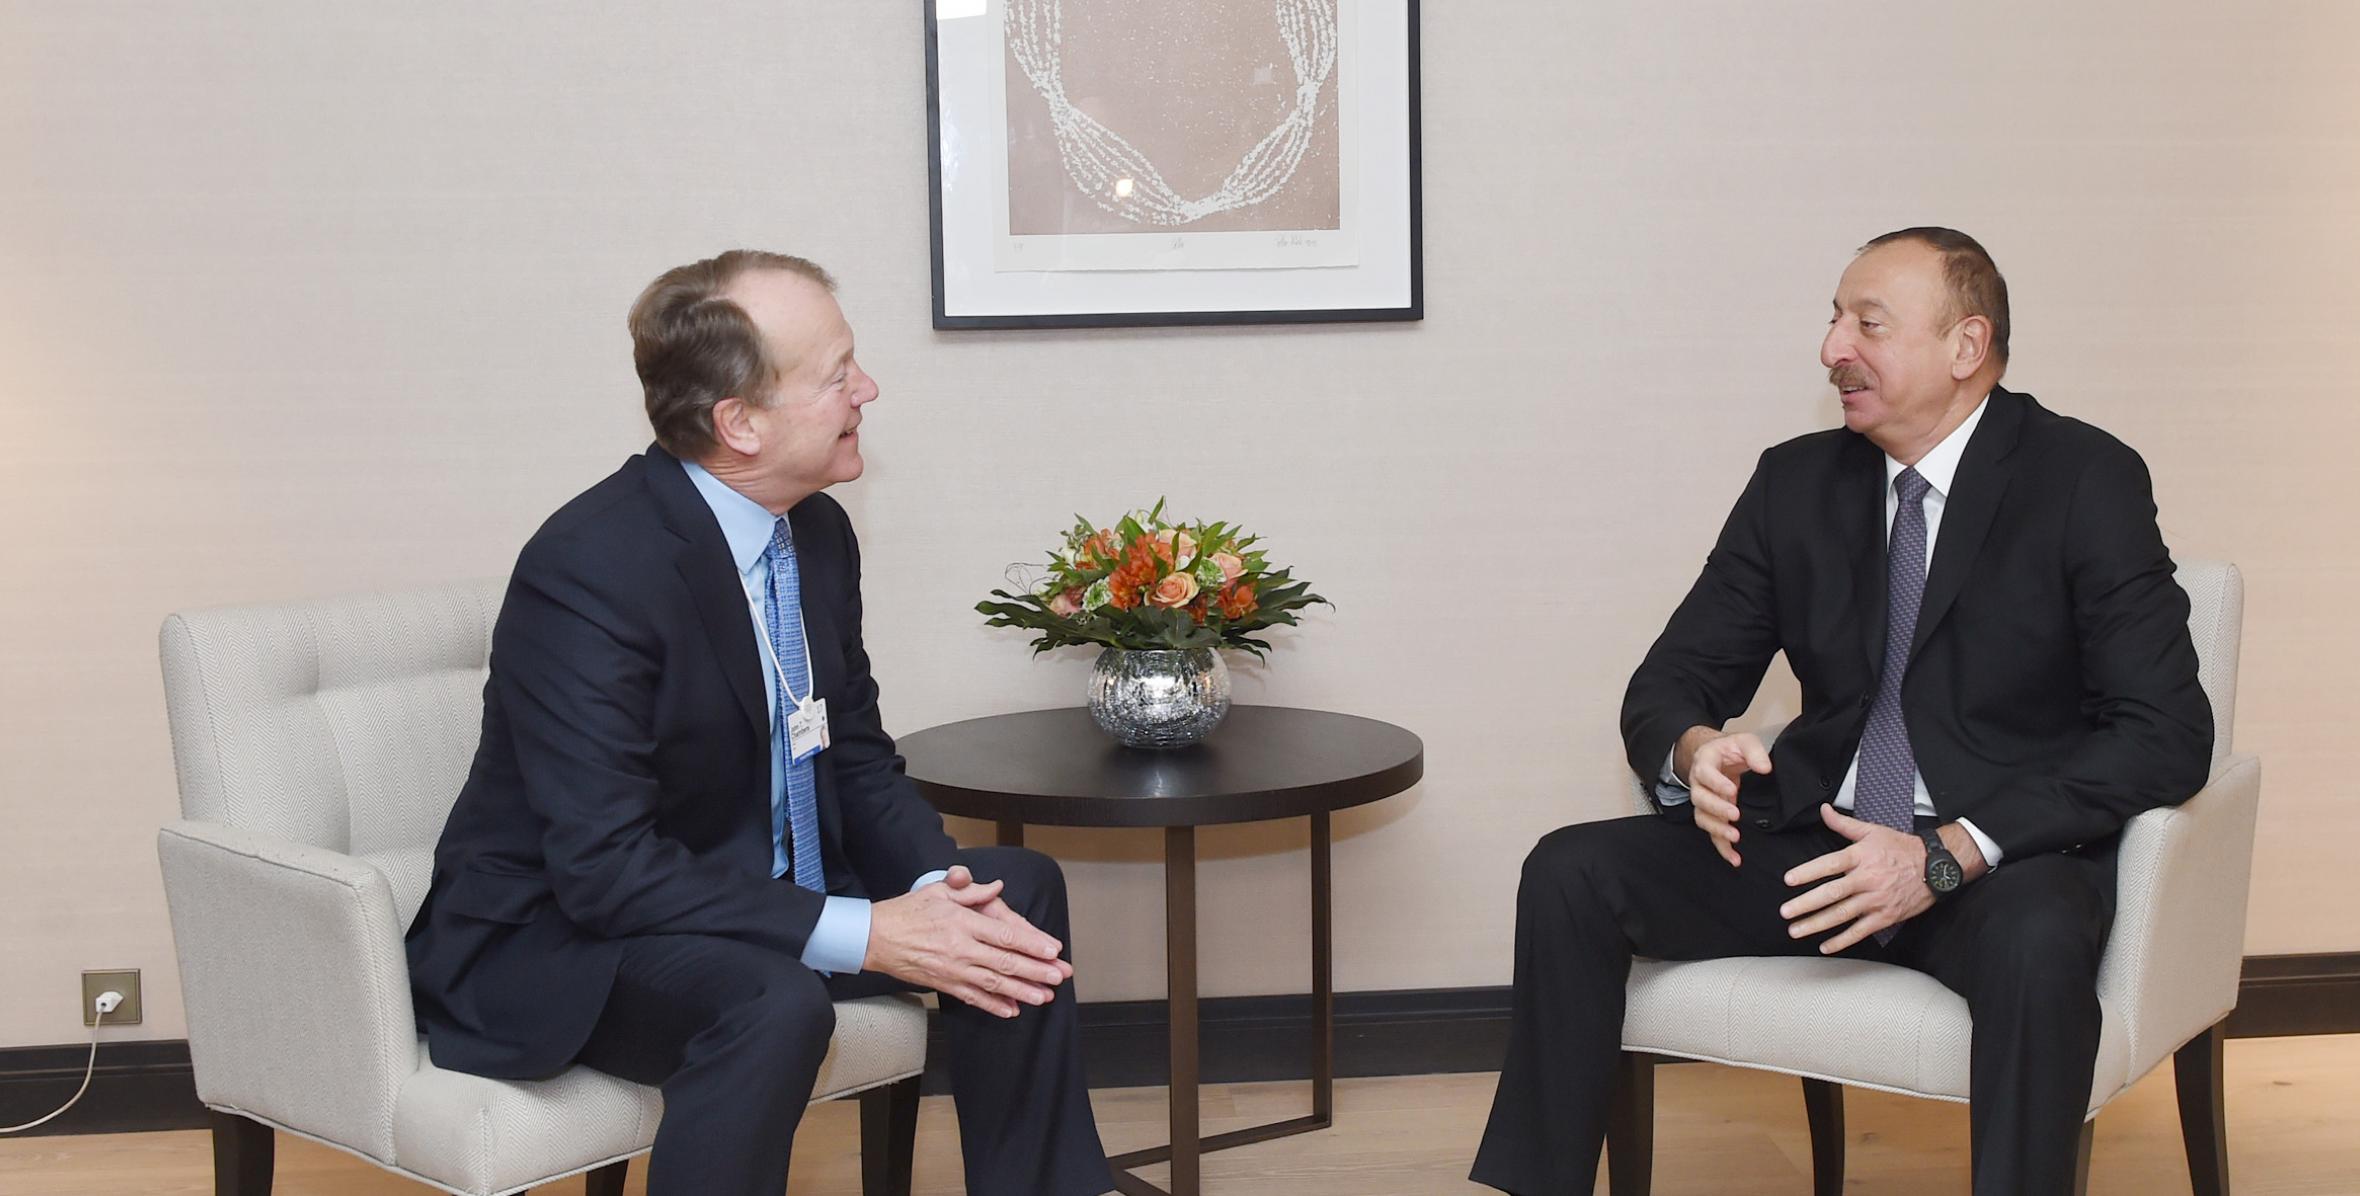 Ilham Aliyev met with Executive Chairman of CISCO in Davos